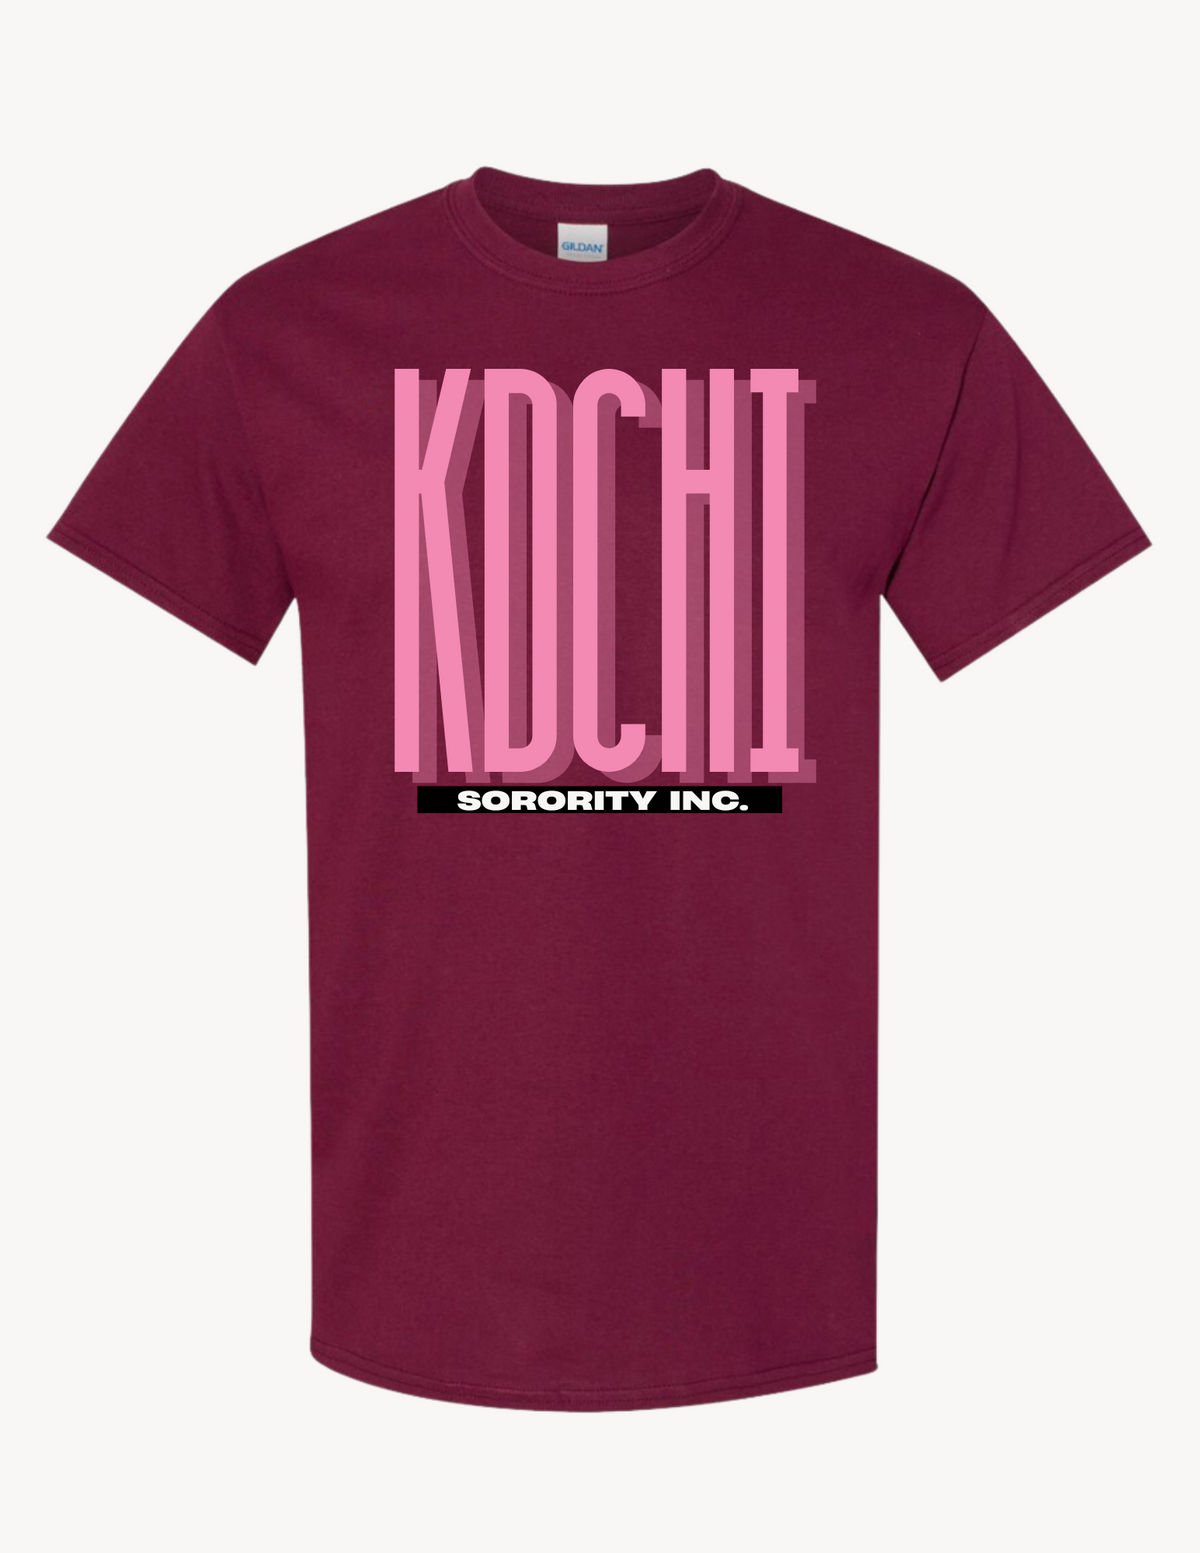 Kdchi Long T-Shirt Front only